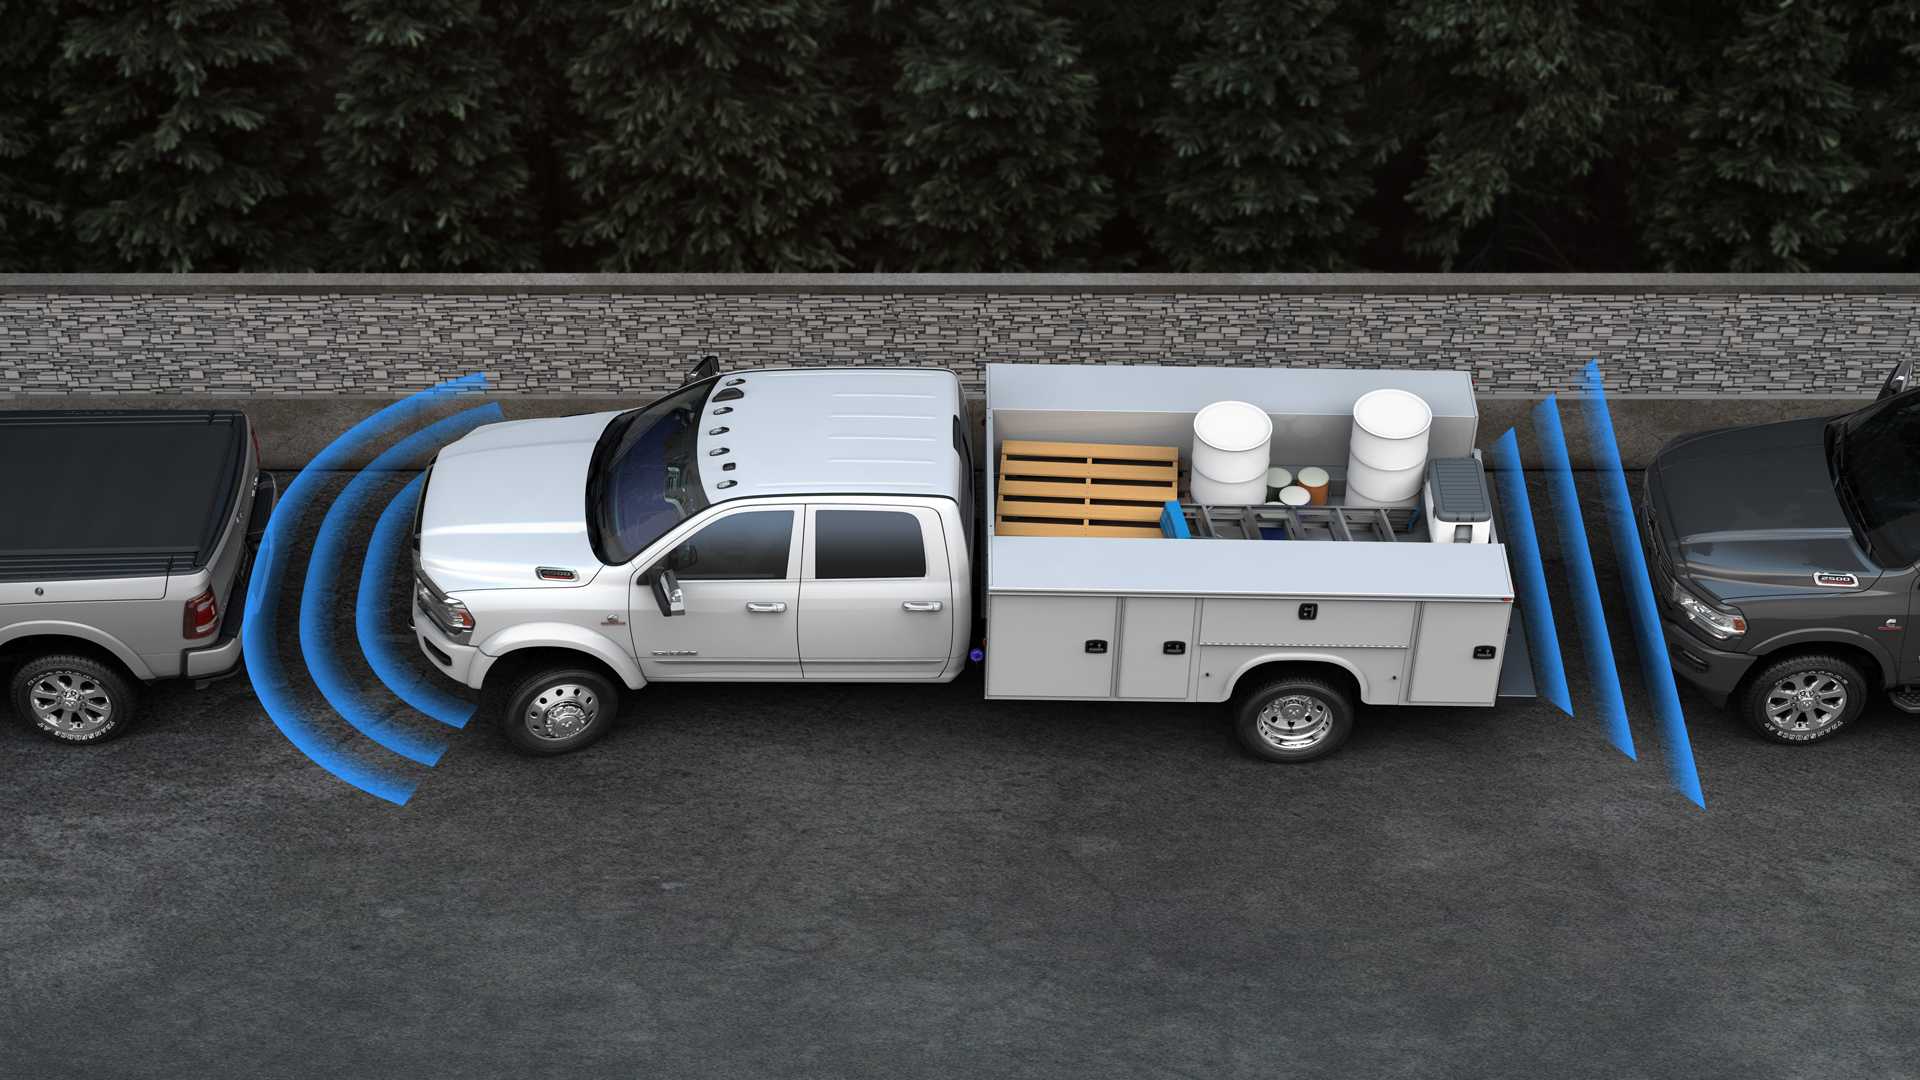 2019-ram-chassis-cab (33)